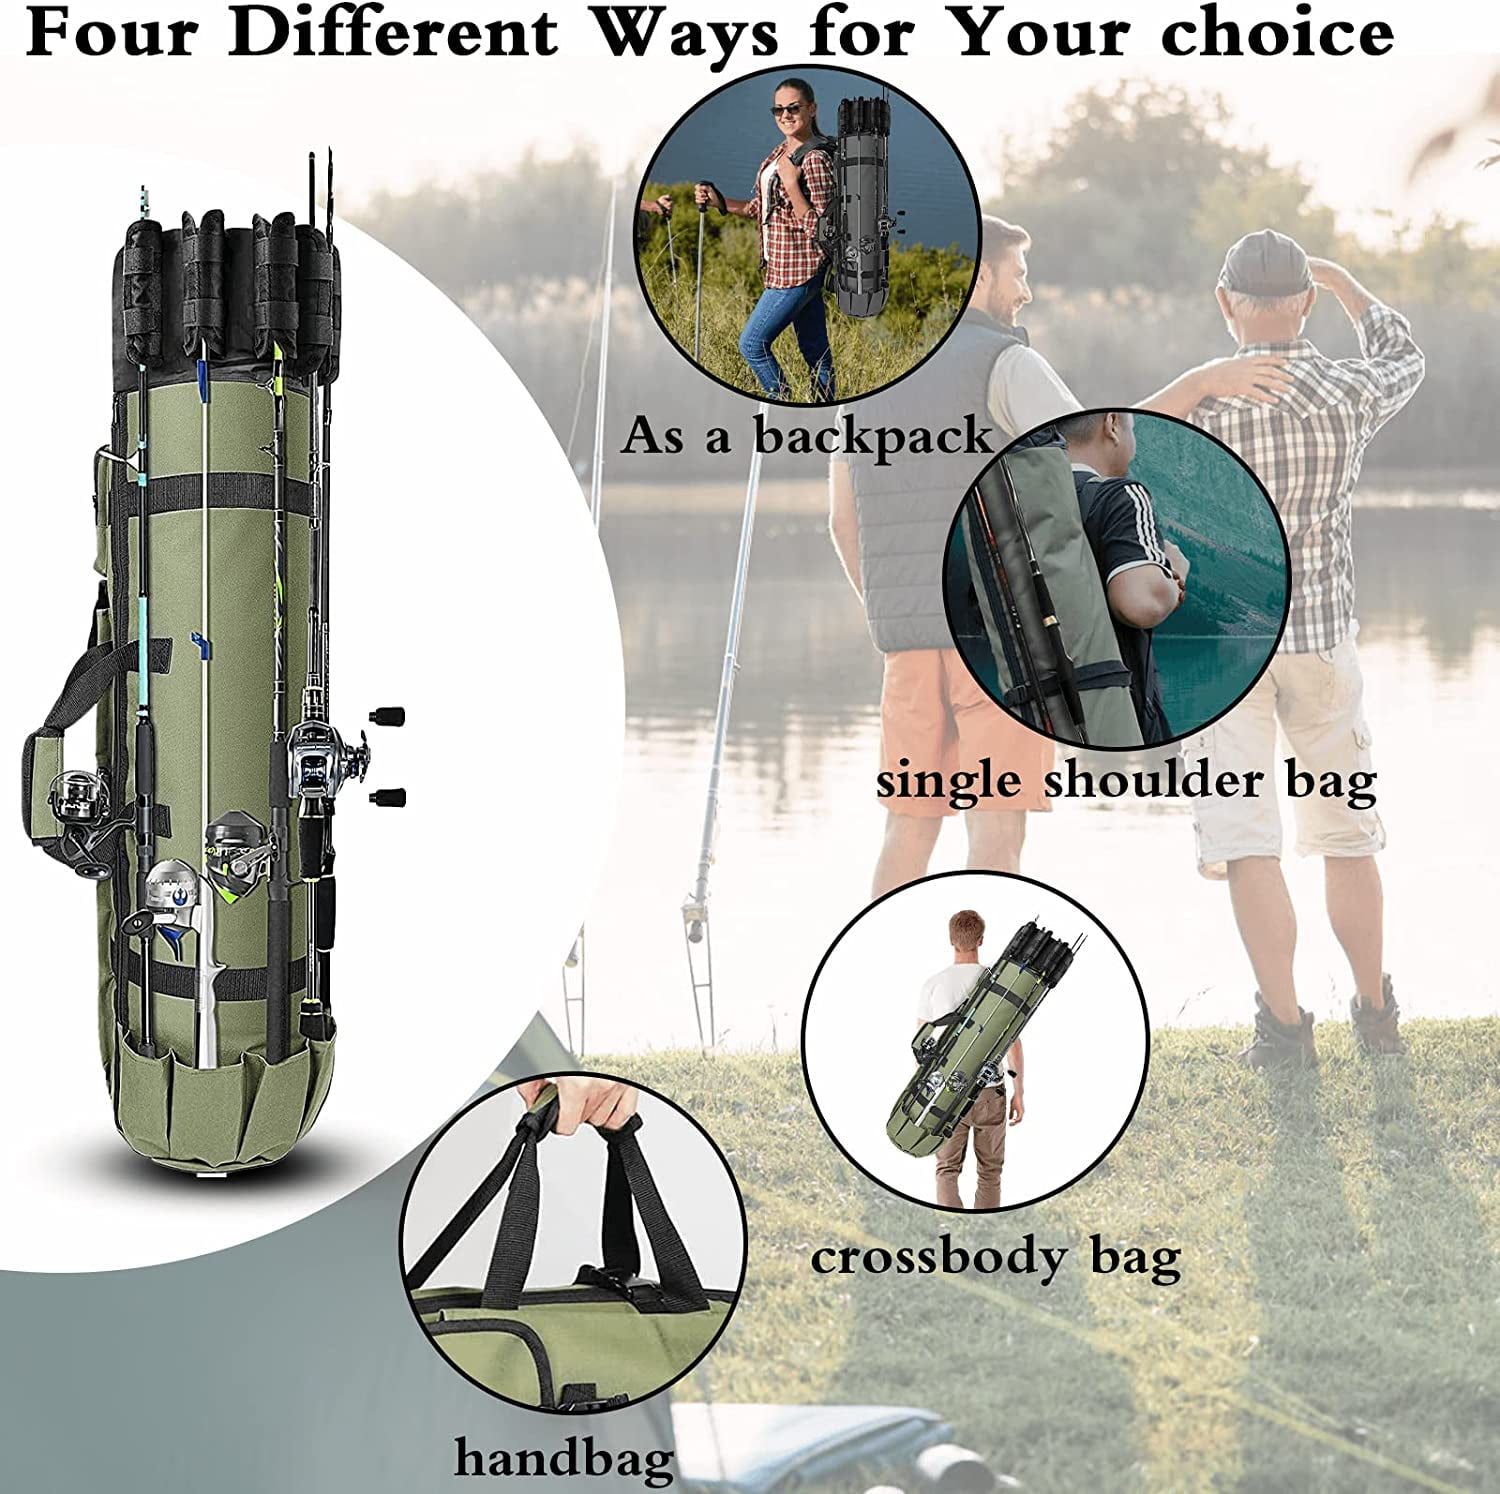 MeterMall Fishing Pole Bag With Rod Holder Fishing Rod Bag Carrier